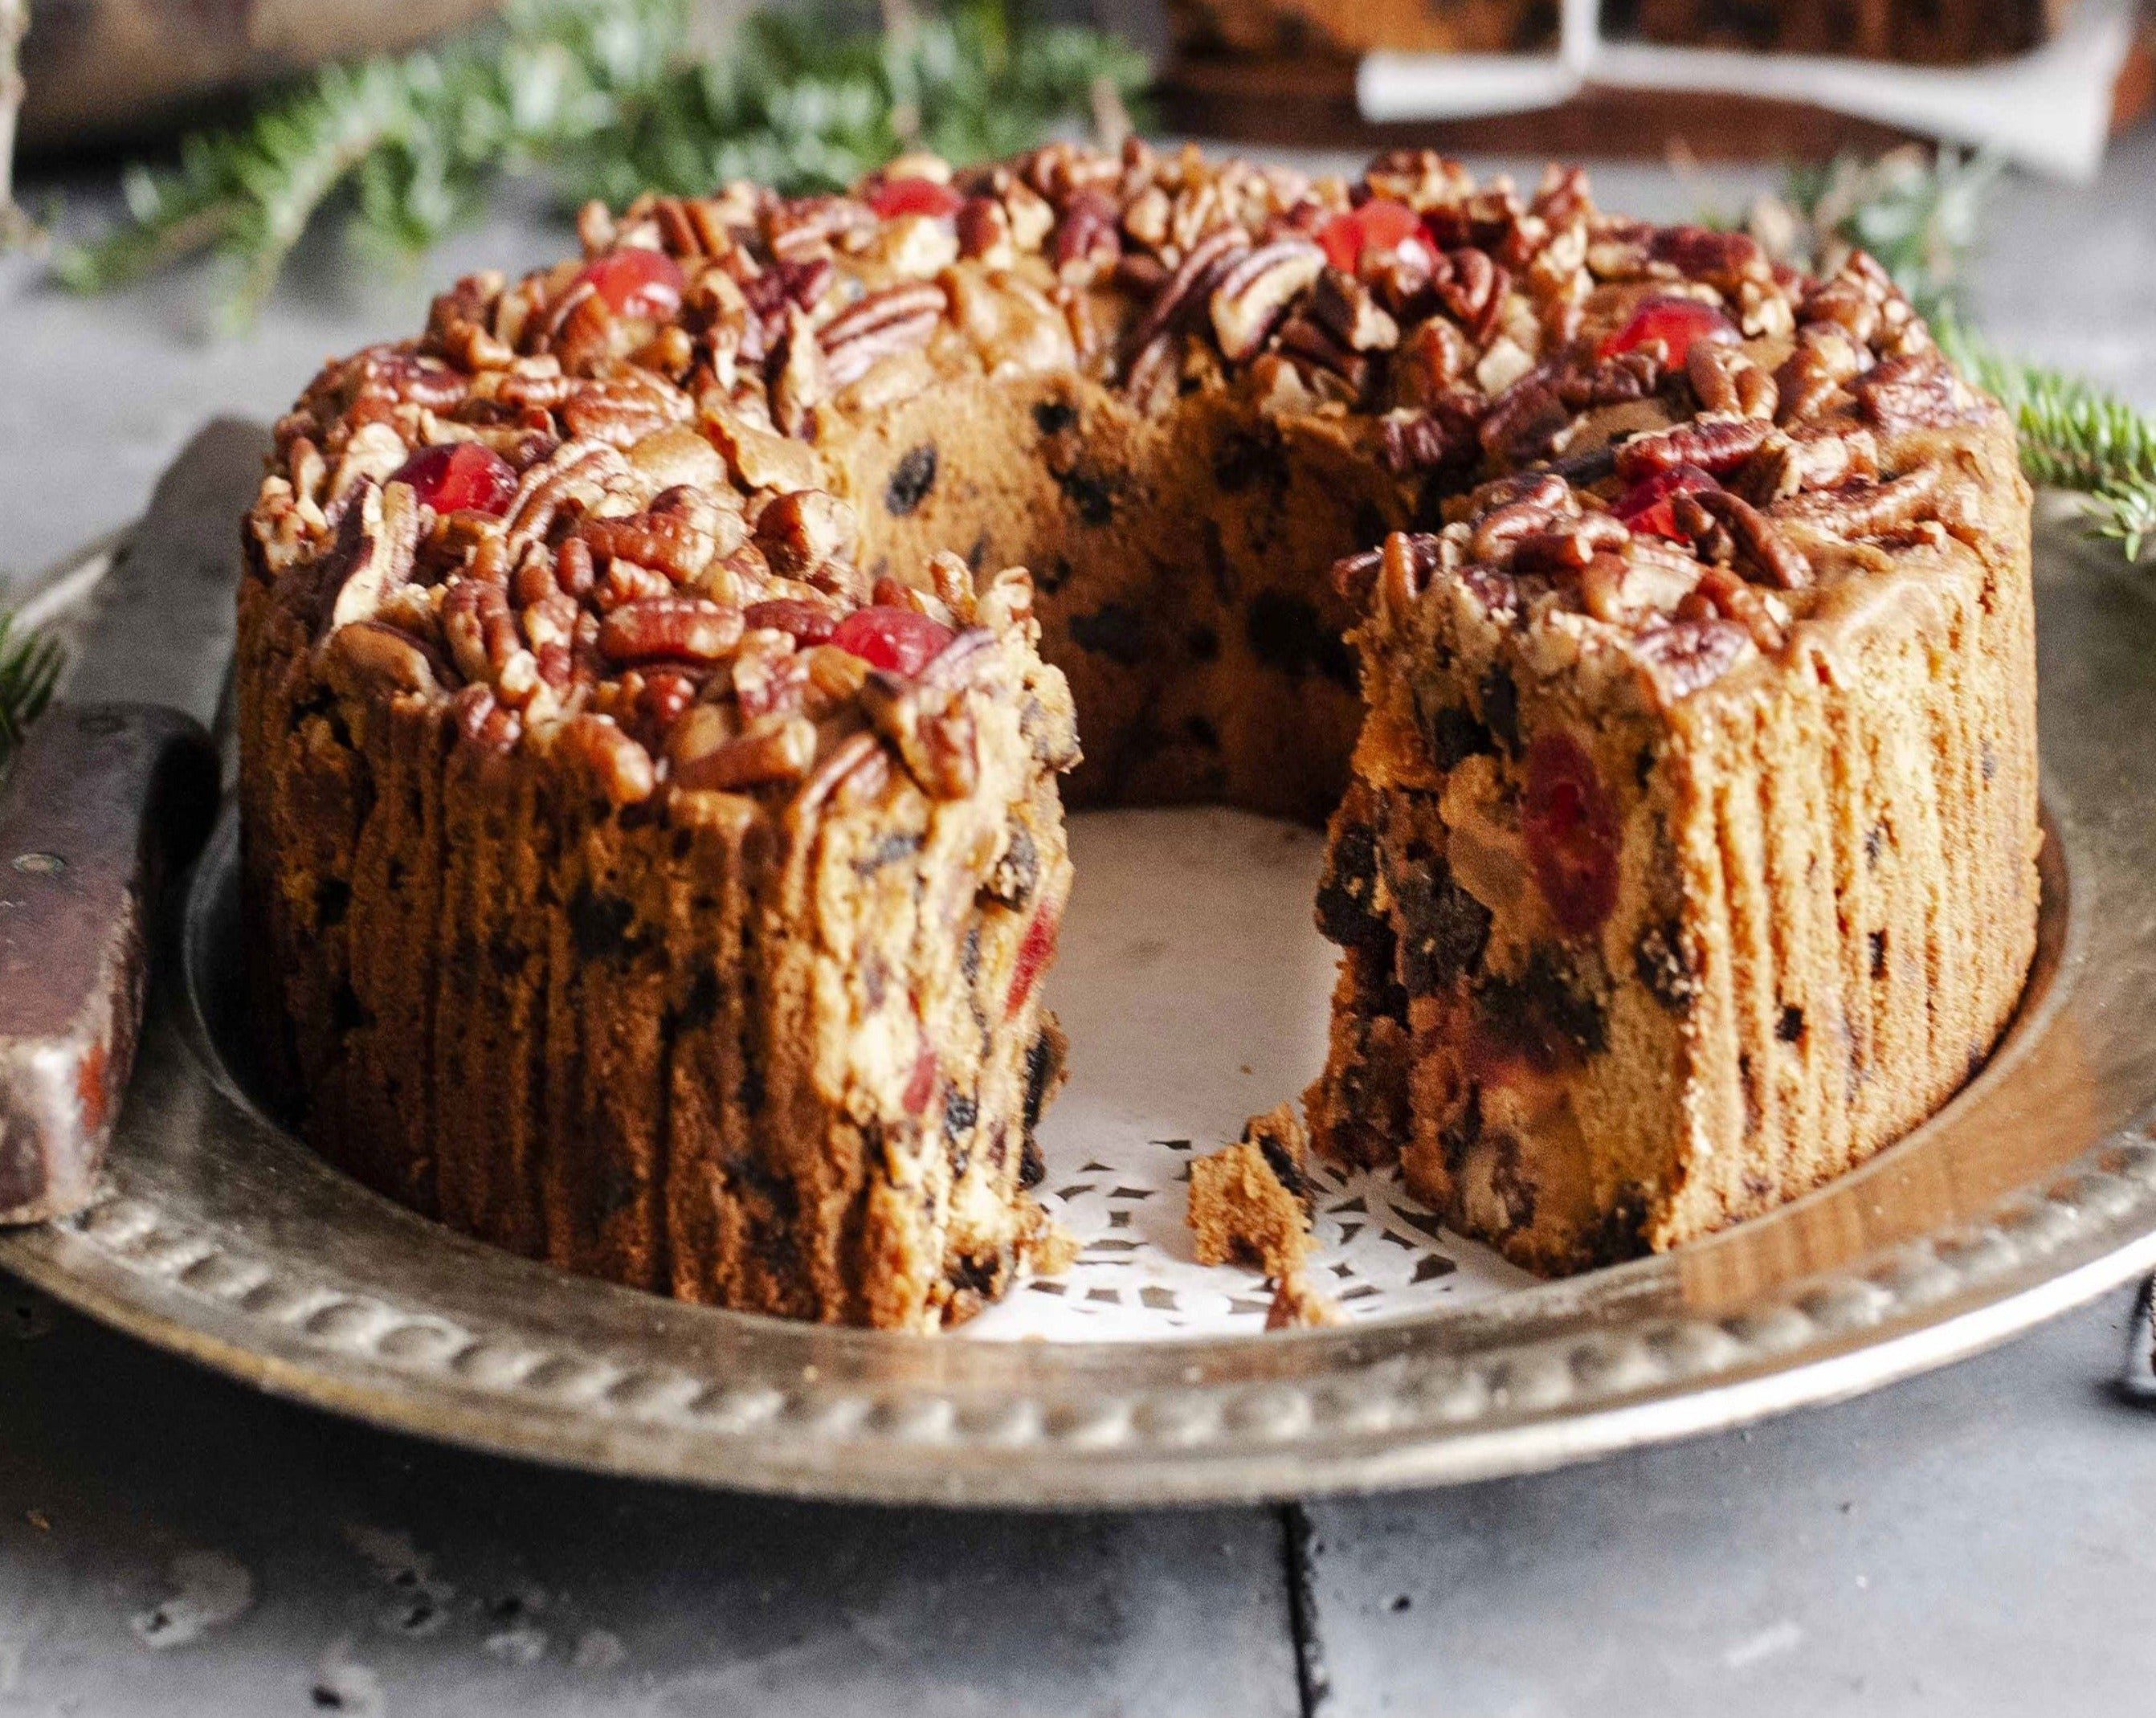 Petha Cake / Light Fruit Cake | Not Out of the Box